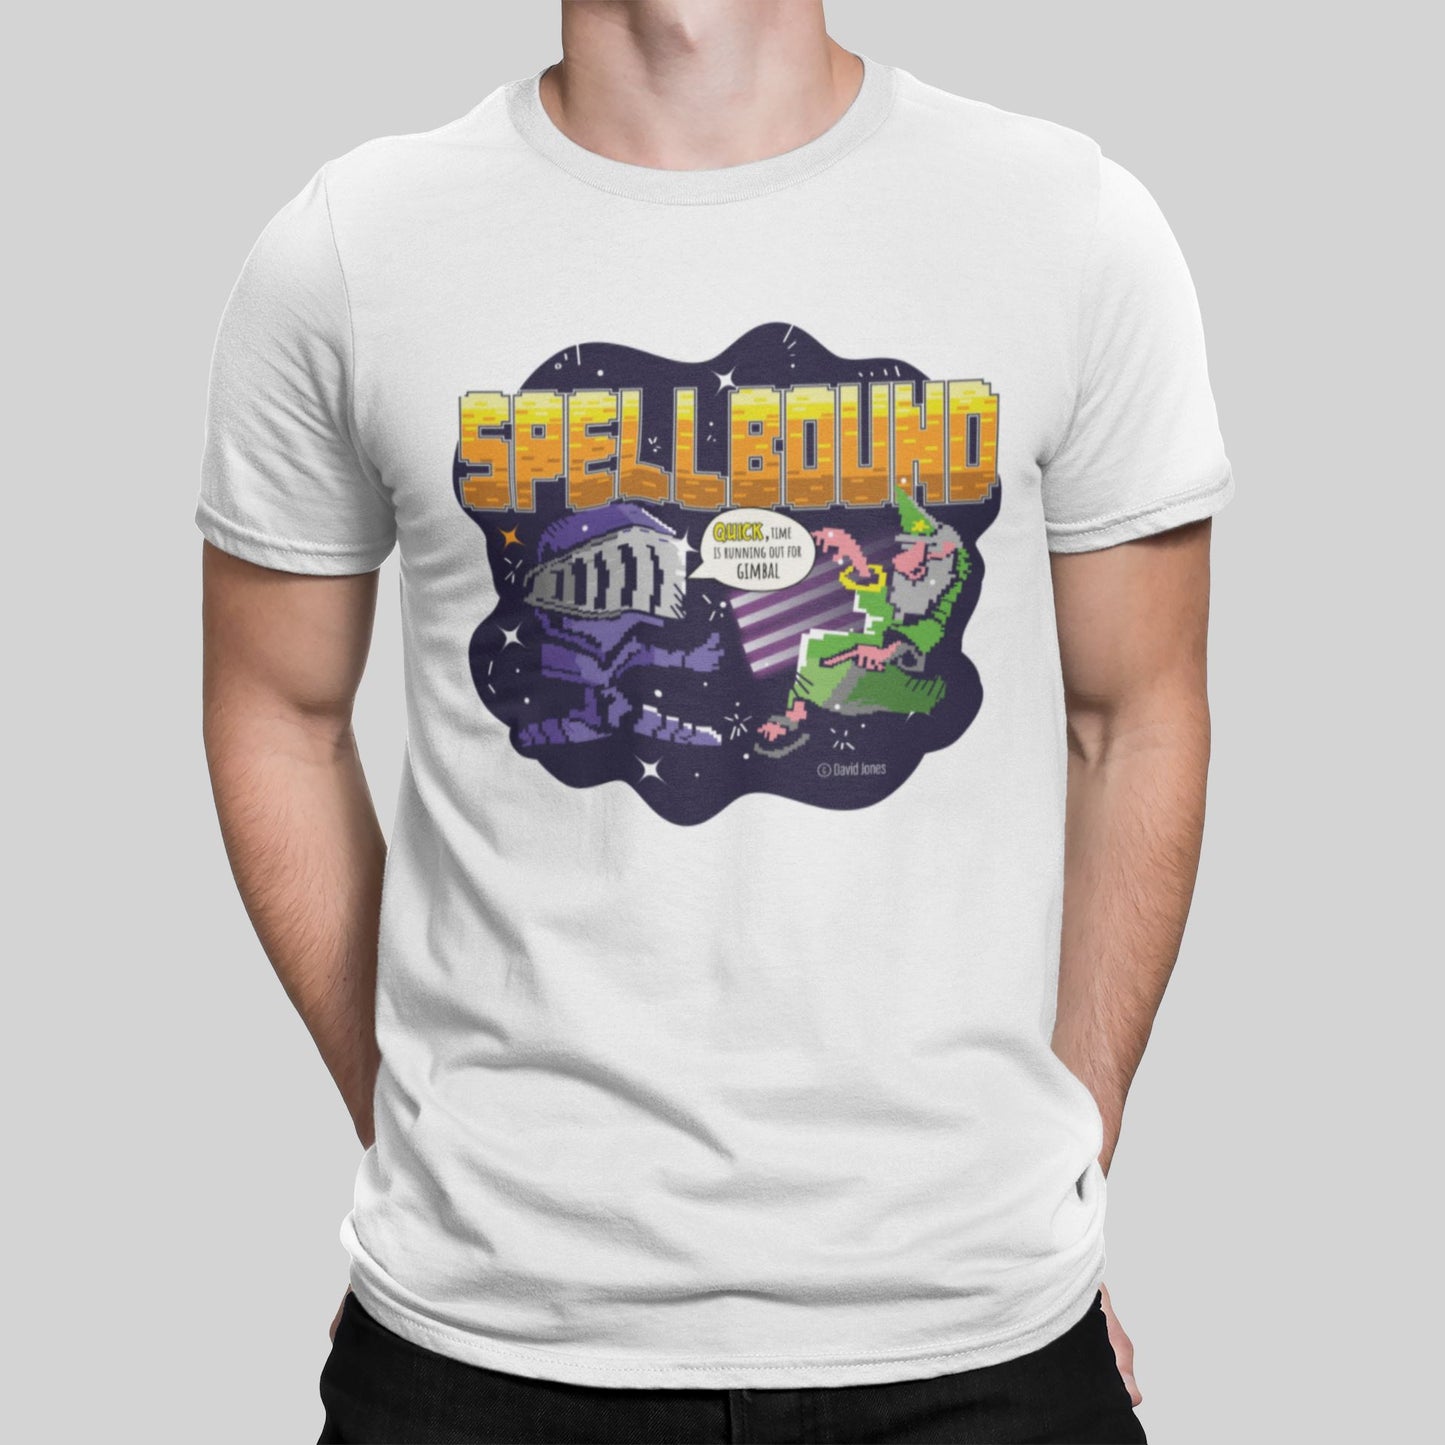 Spellbound Retro Gaming T-Shirt T-Shirt Seven Squared Small 34-36" White 